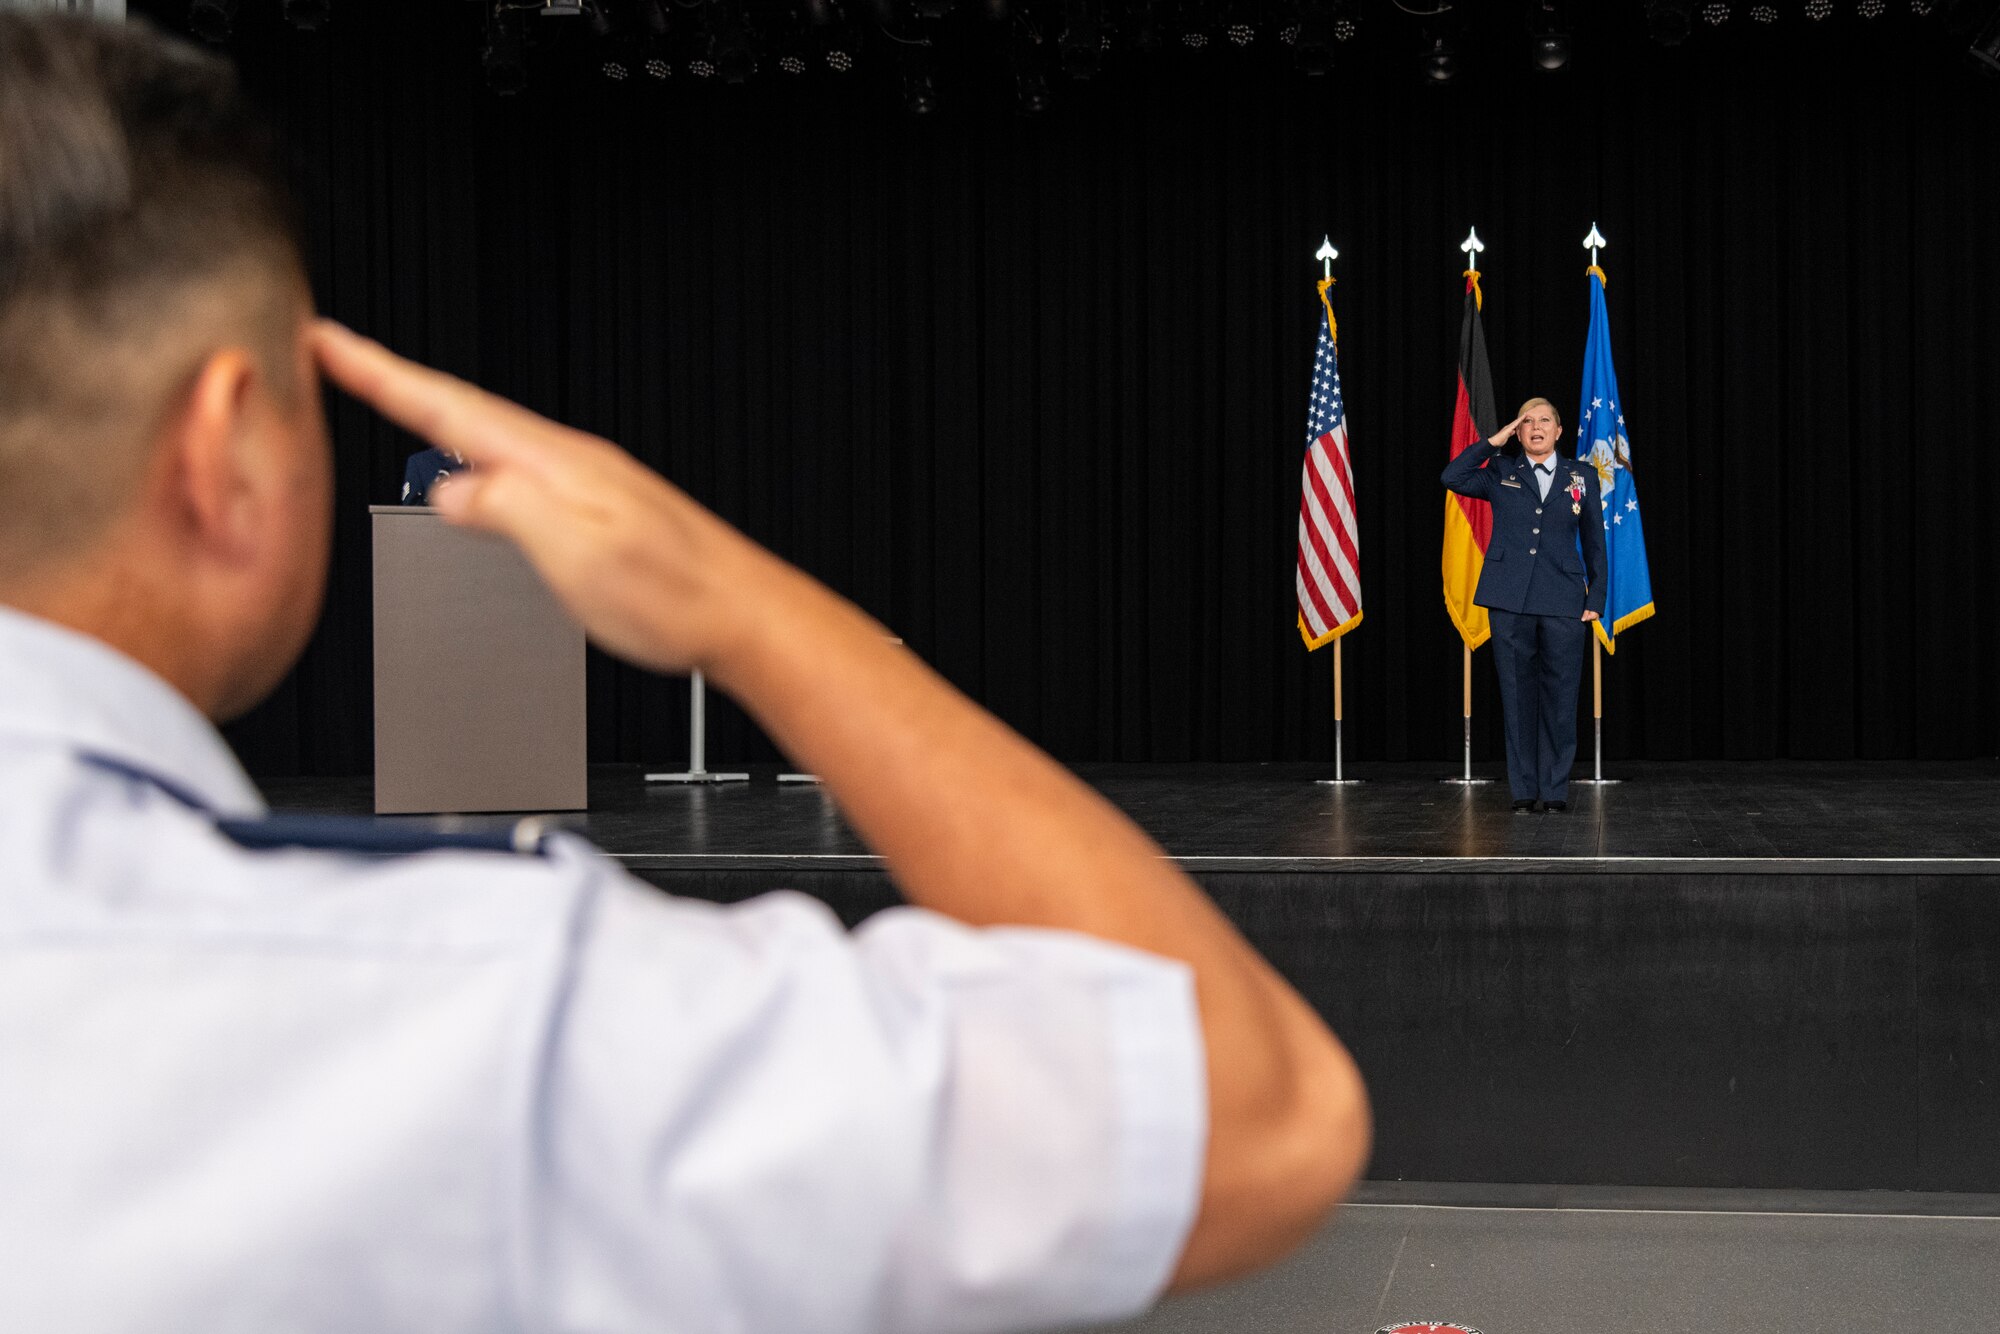 A military member salutes another military member